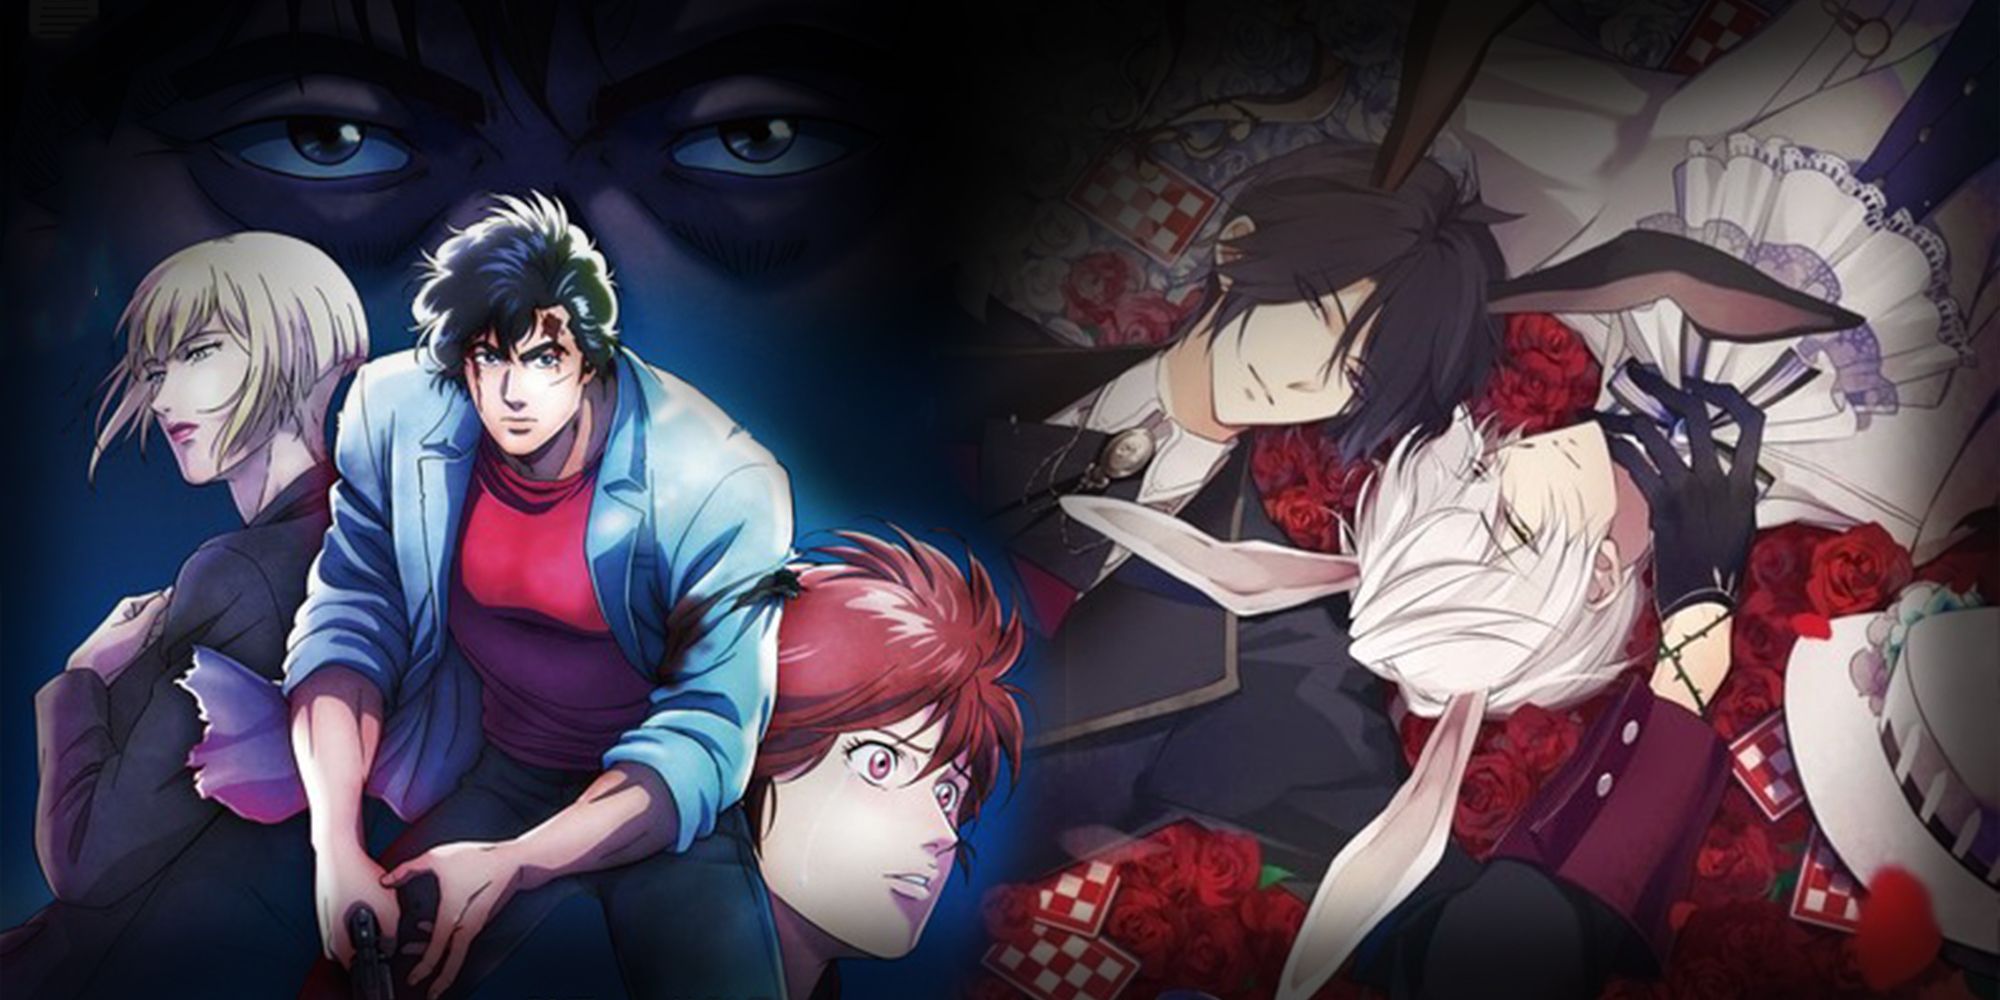 10 Best Action Anime Movies You Should Not Miss